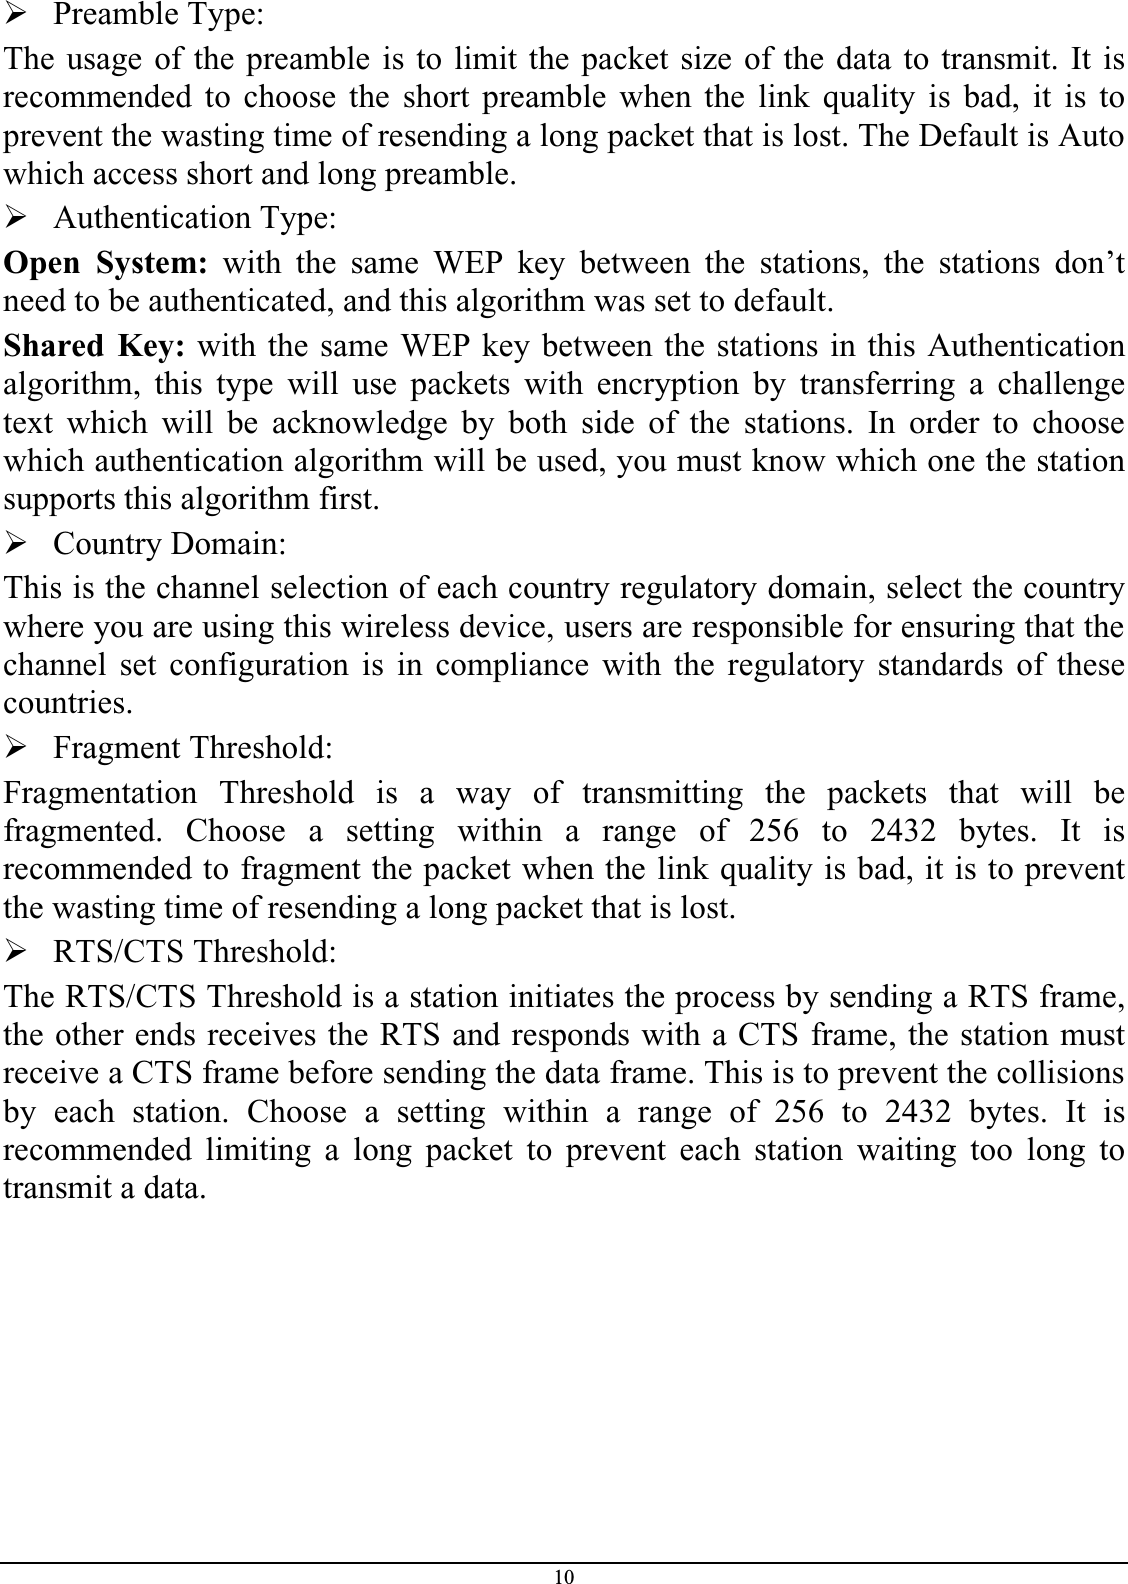 10¾Preamble Type:The usage of the preamble is to limit the packet size of the data to transmit. It isrecommended to choose the short preamble when the link quality is bad, it is toprevent the wasting time of resending a long packet that is lost. The Default is Auto which access short and long preamble.¾Authentication Type:Open System: with the same WEP key between the stations, the stations don’tneed to be authenticated, and this algorithm was set to default.Shared Key: with the same WEP key between the stations in this Authenticationalgorithm, this type will use packets with encryption by transferring a challengetext which will be acknowledge by both side of the stations. In order to choosewhich authentication algorithm will be used, you must know which one the stationsupports this algorithm first.¾Country Domain:This is the channel selection of each country regulatory domain, select the countrywhere you are using this wireless device, users are responsible for ensuring that the channel set configuration is in compliance with the regulatory standards of thesecountries.¾Fragment Threshold:Fragmentation Threshold is a way of transmitting the packets that will befragmented. Choose a setting within a range of 256 to 2432 bytes. It isrecommended to fragment the packet when the link quality is bad, it is to preventthe wasting time of resending a long packet that is lost.¾RTS/CTS Threshold:The RTS/CTS Threshold is a station initiates the process by sending a RTS frame,the other ends receives the RTS and responds with a CTS frame, the station mustreceive a CTS frame before sending the data frame. This is to prevent the collisions by each station. Choose a setting within a range of 256 to 2432 bytes. It isrecommended limiting a long packet to prevent each station waiting too long totransmit a data.